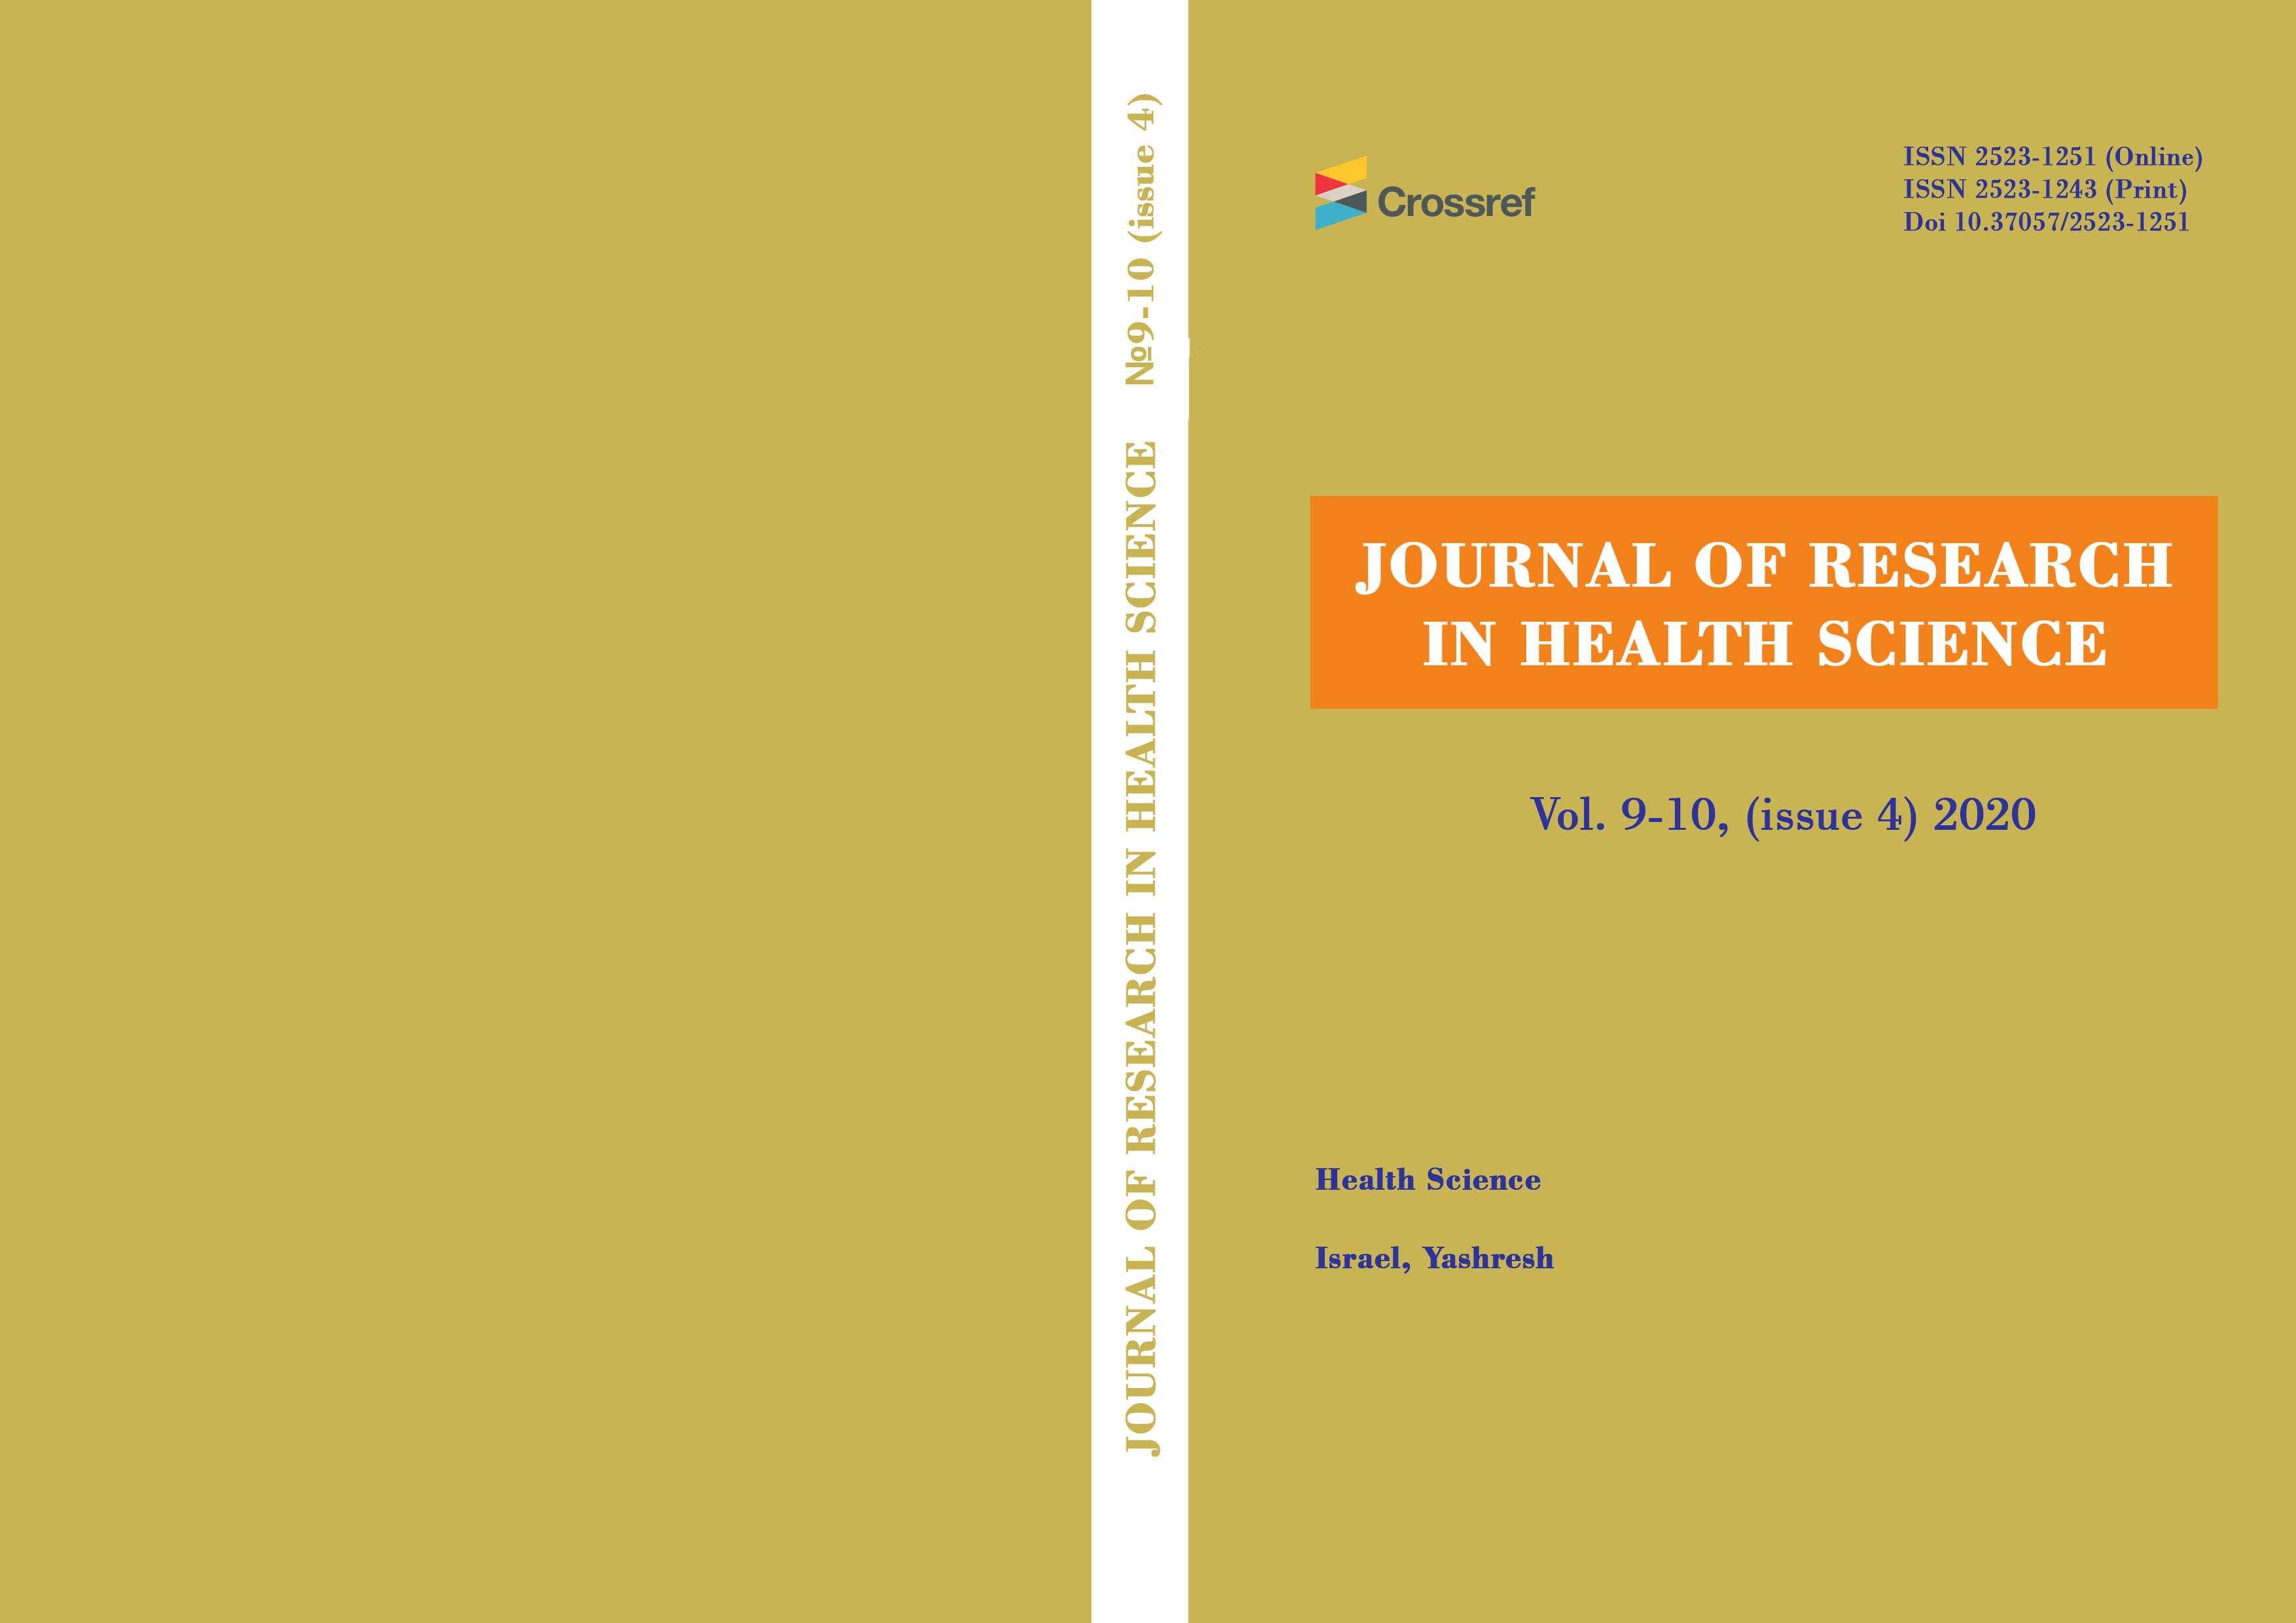 journal of research in health sciences